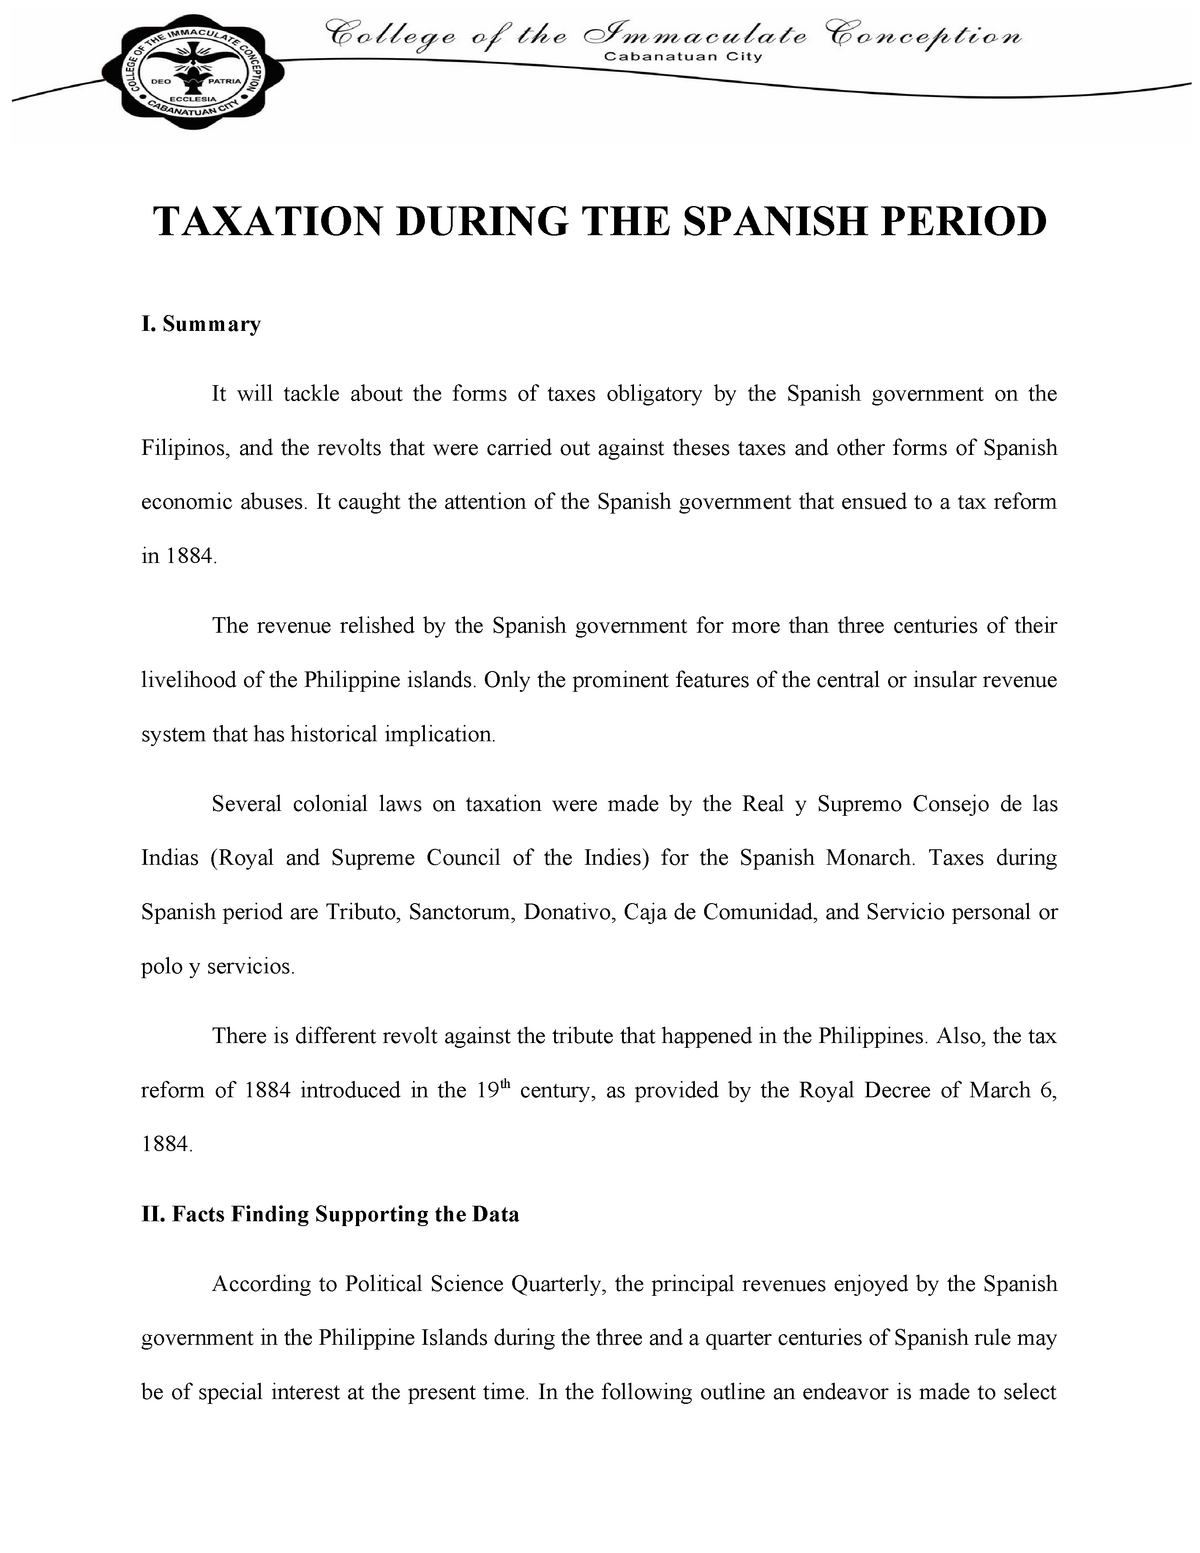 taxation-during-the-spanish-period-summary-bs-psychology-studocu